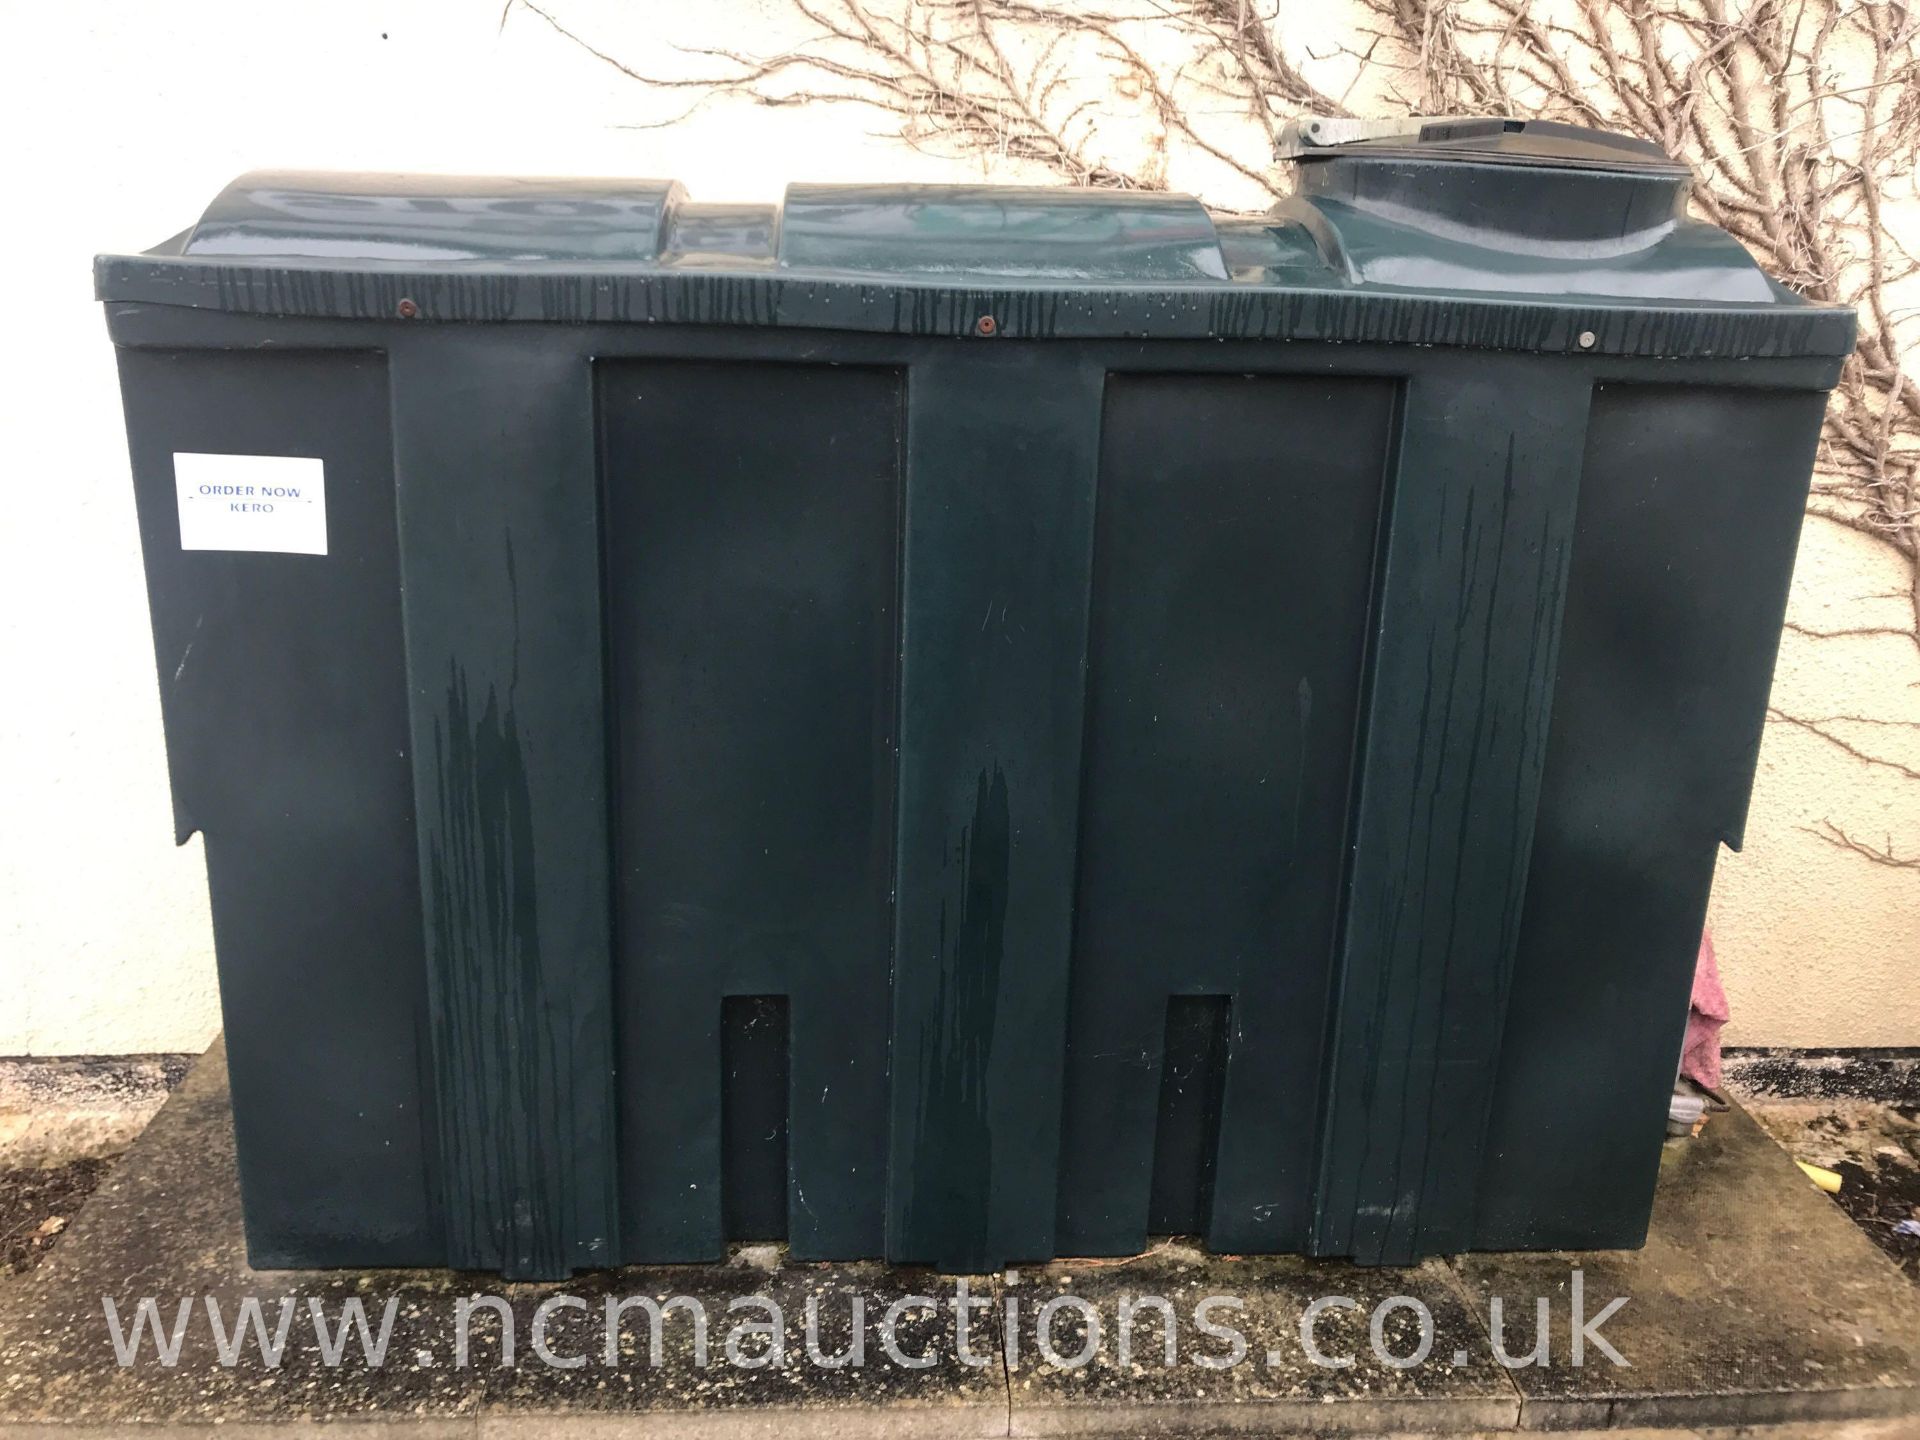 ** NO RESERVE ** Waste oil containers storage